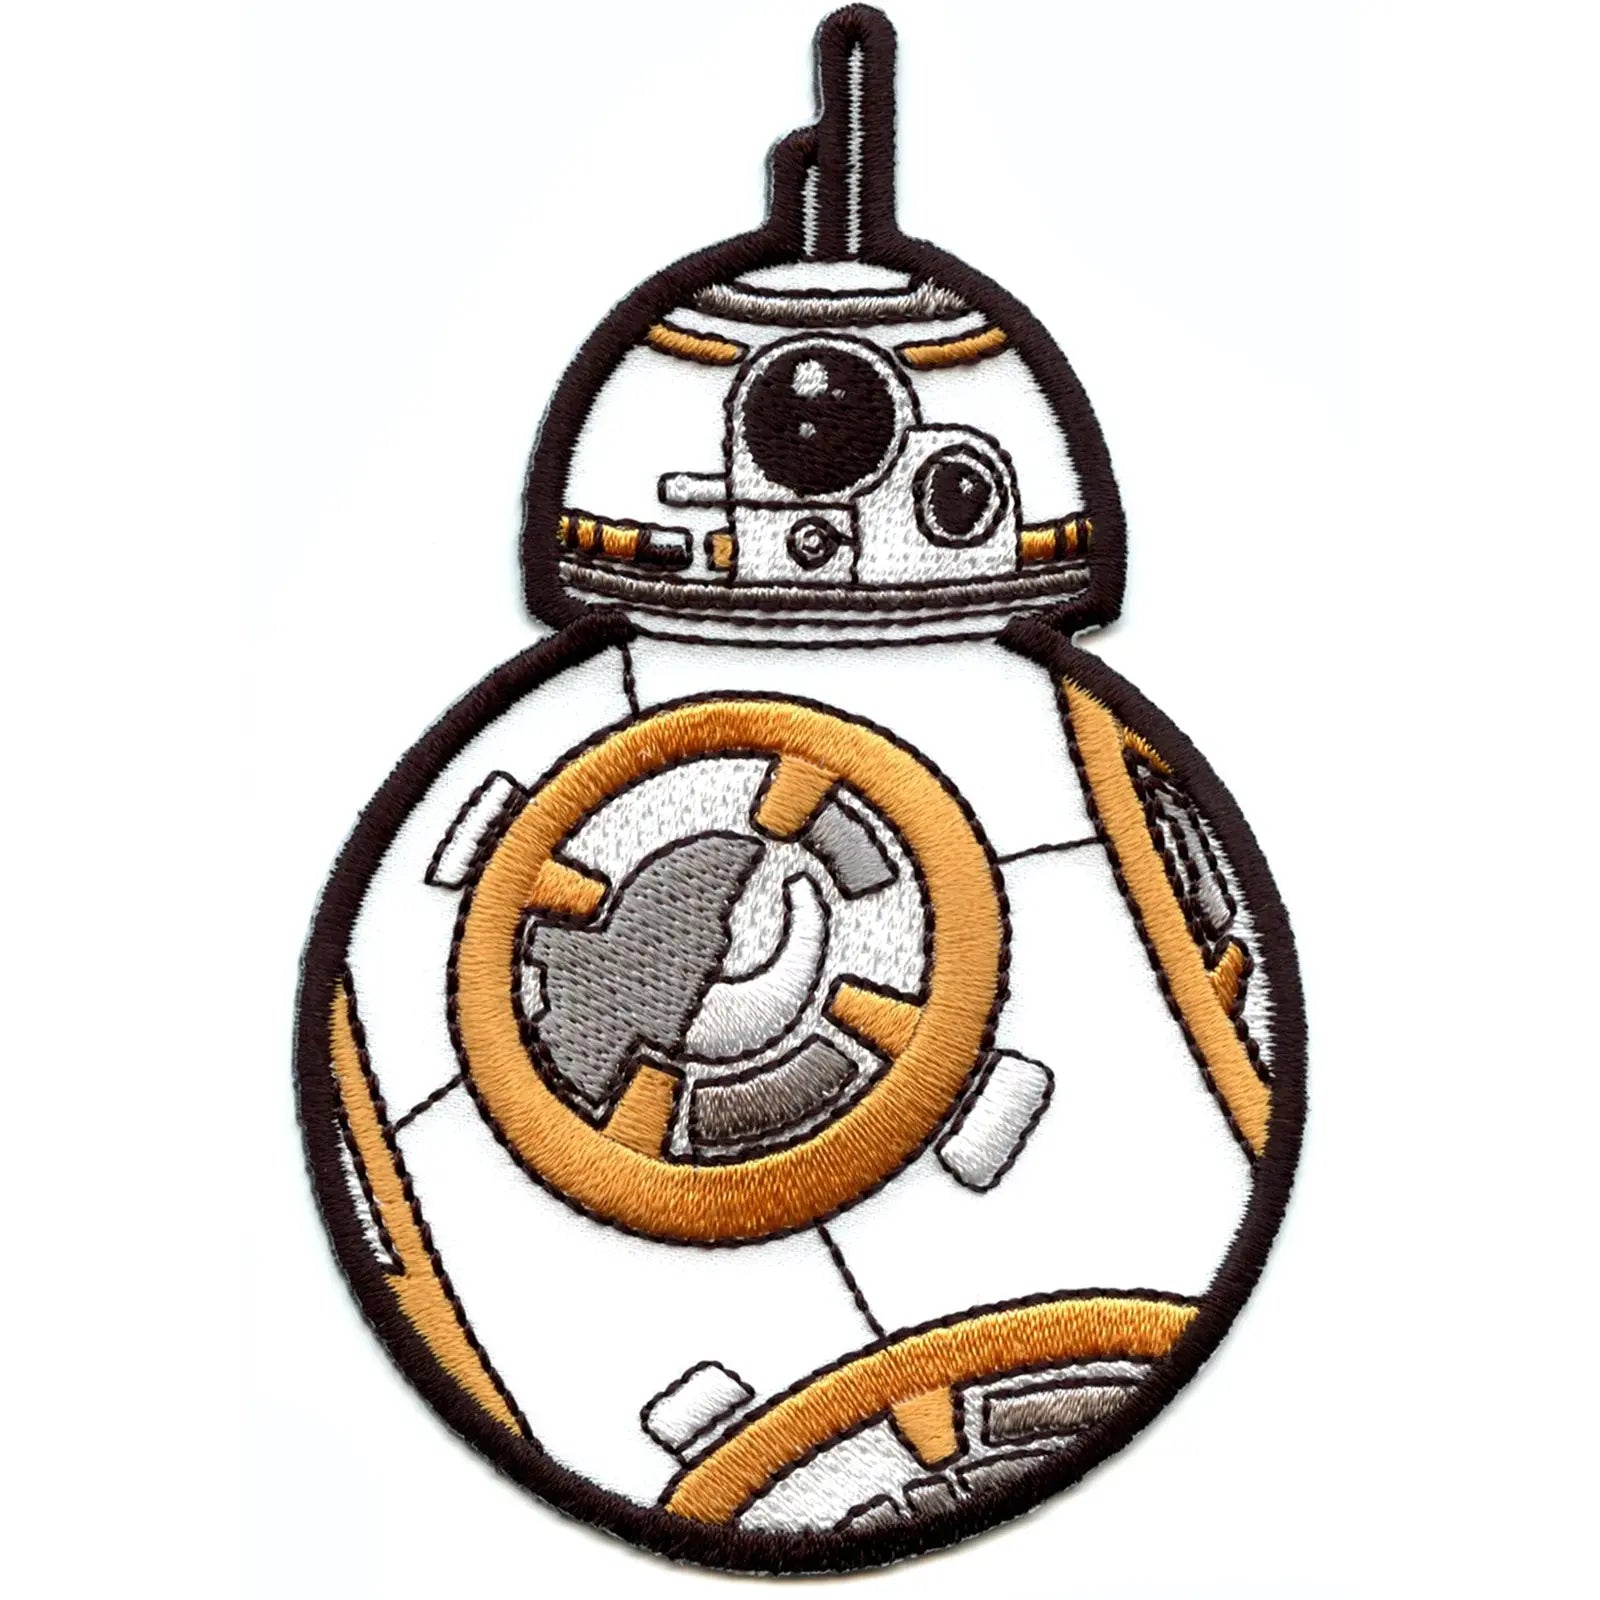 Star Wars BB-8 Iron on Applique Patch 